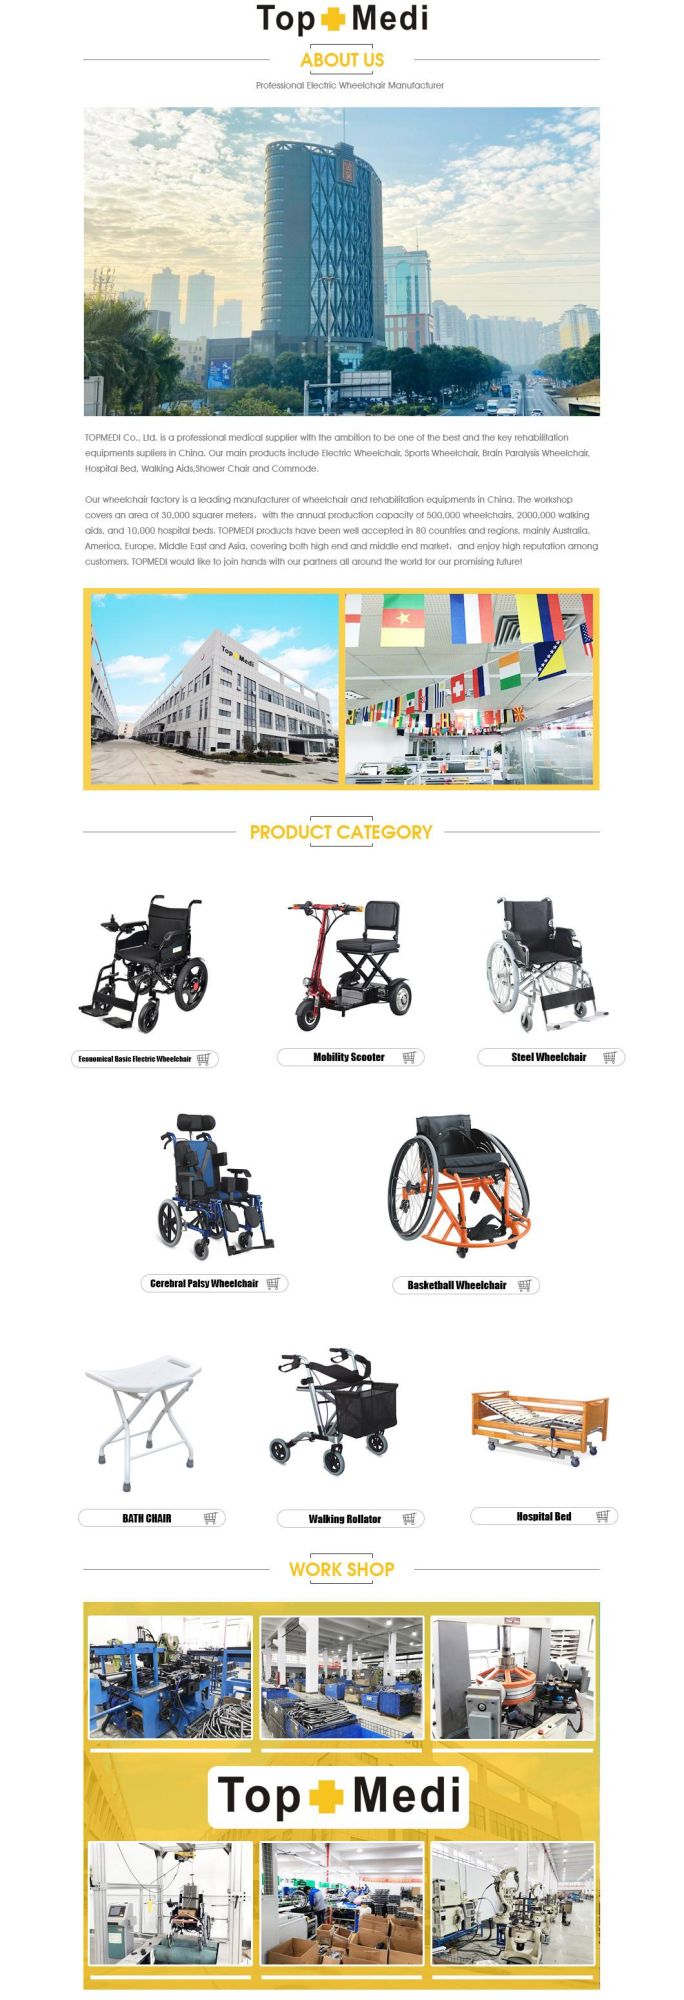 Hot Sale Tew002 Powerful Electric Wheelchair for Handicapped